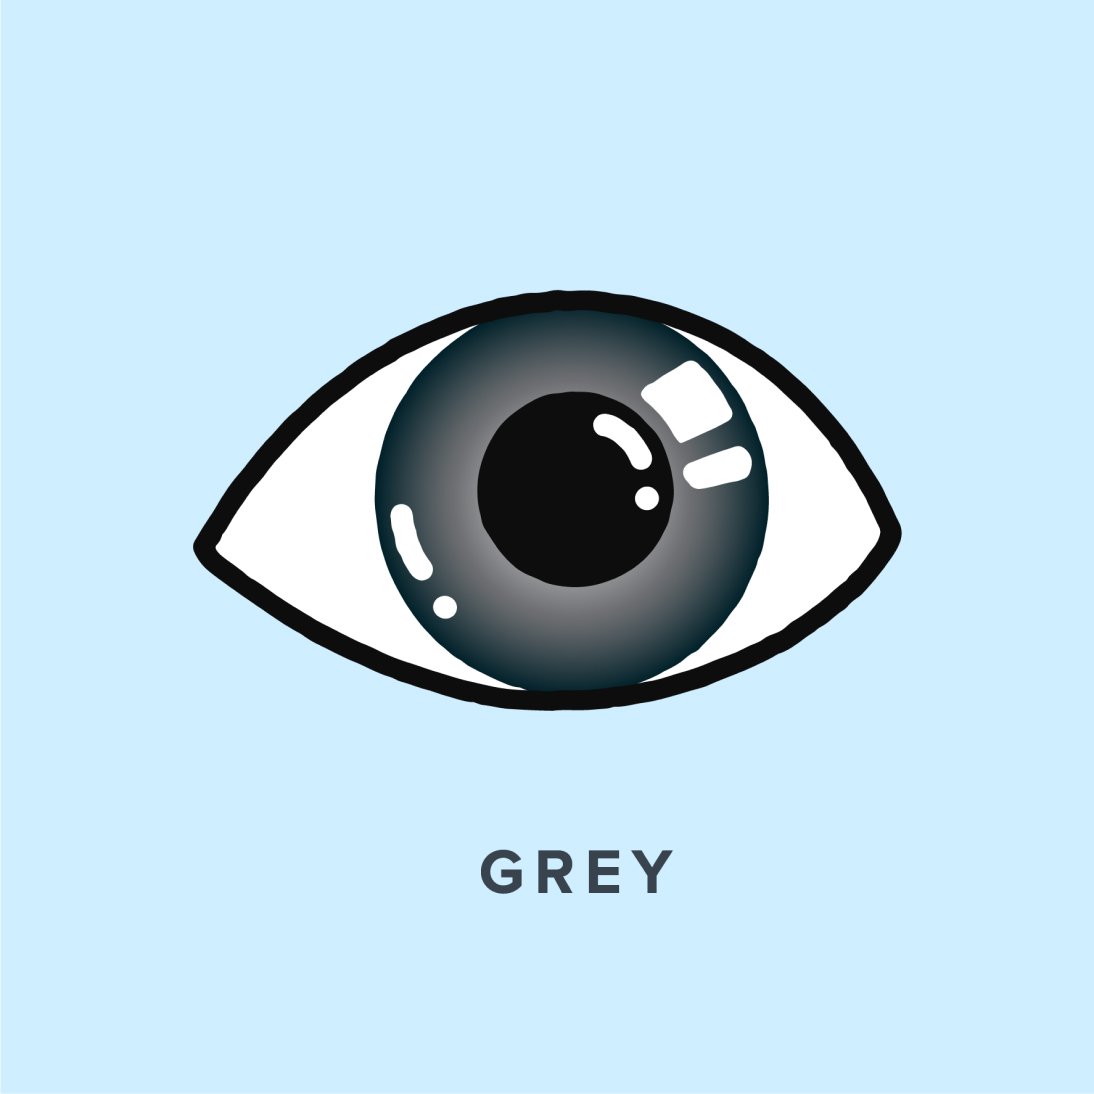 Illustration of a grey-colored eye